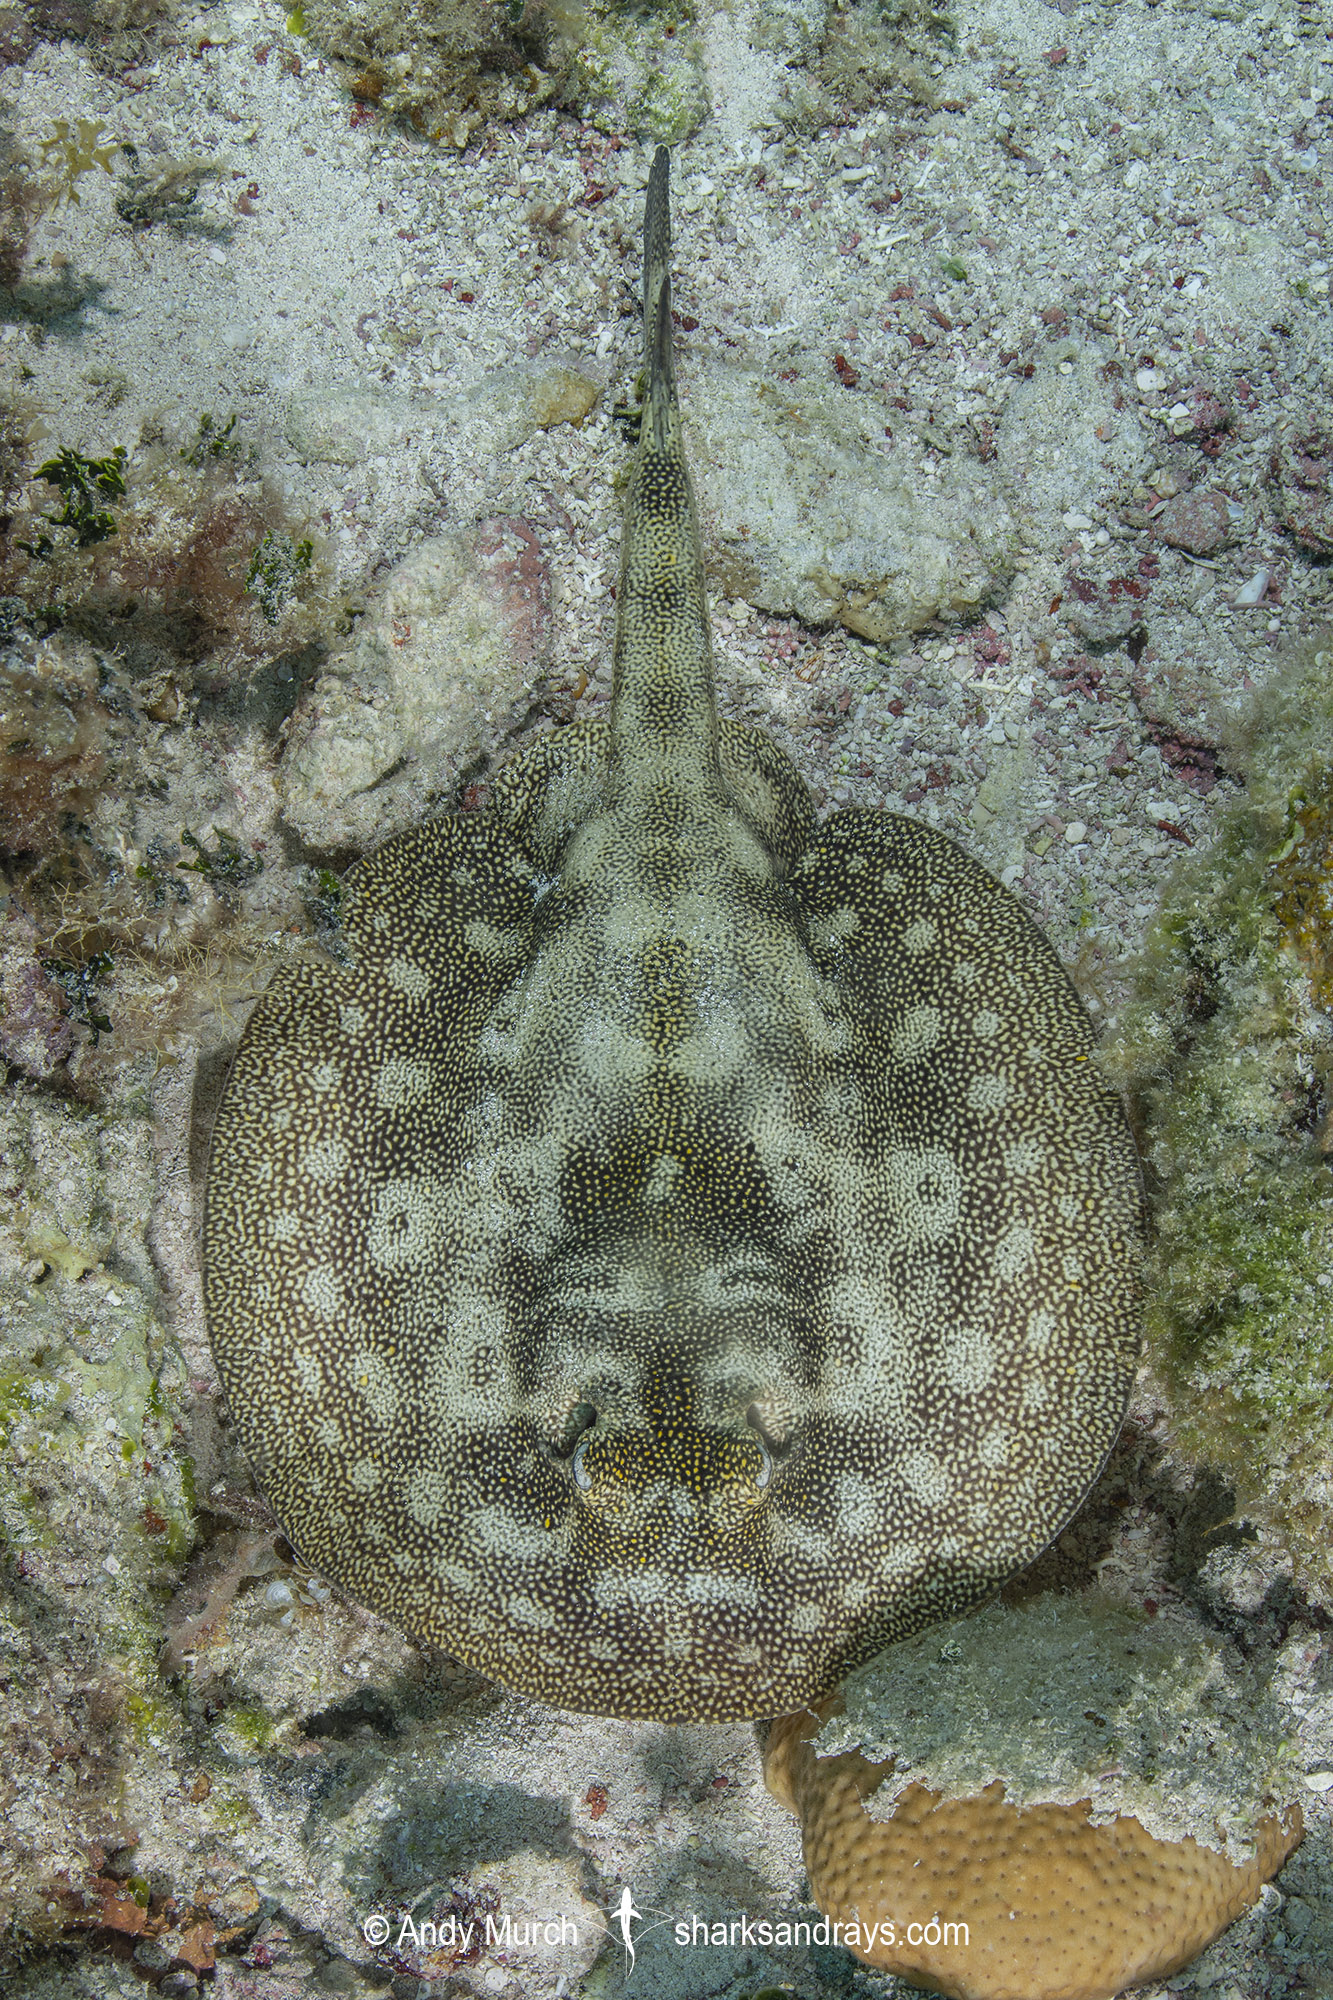 Yellow Spotted Stingray